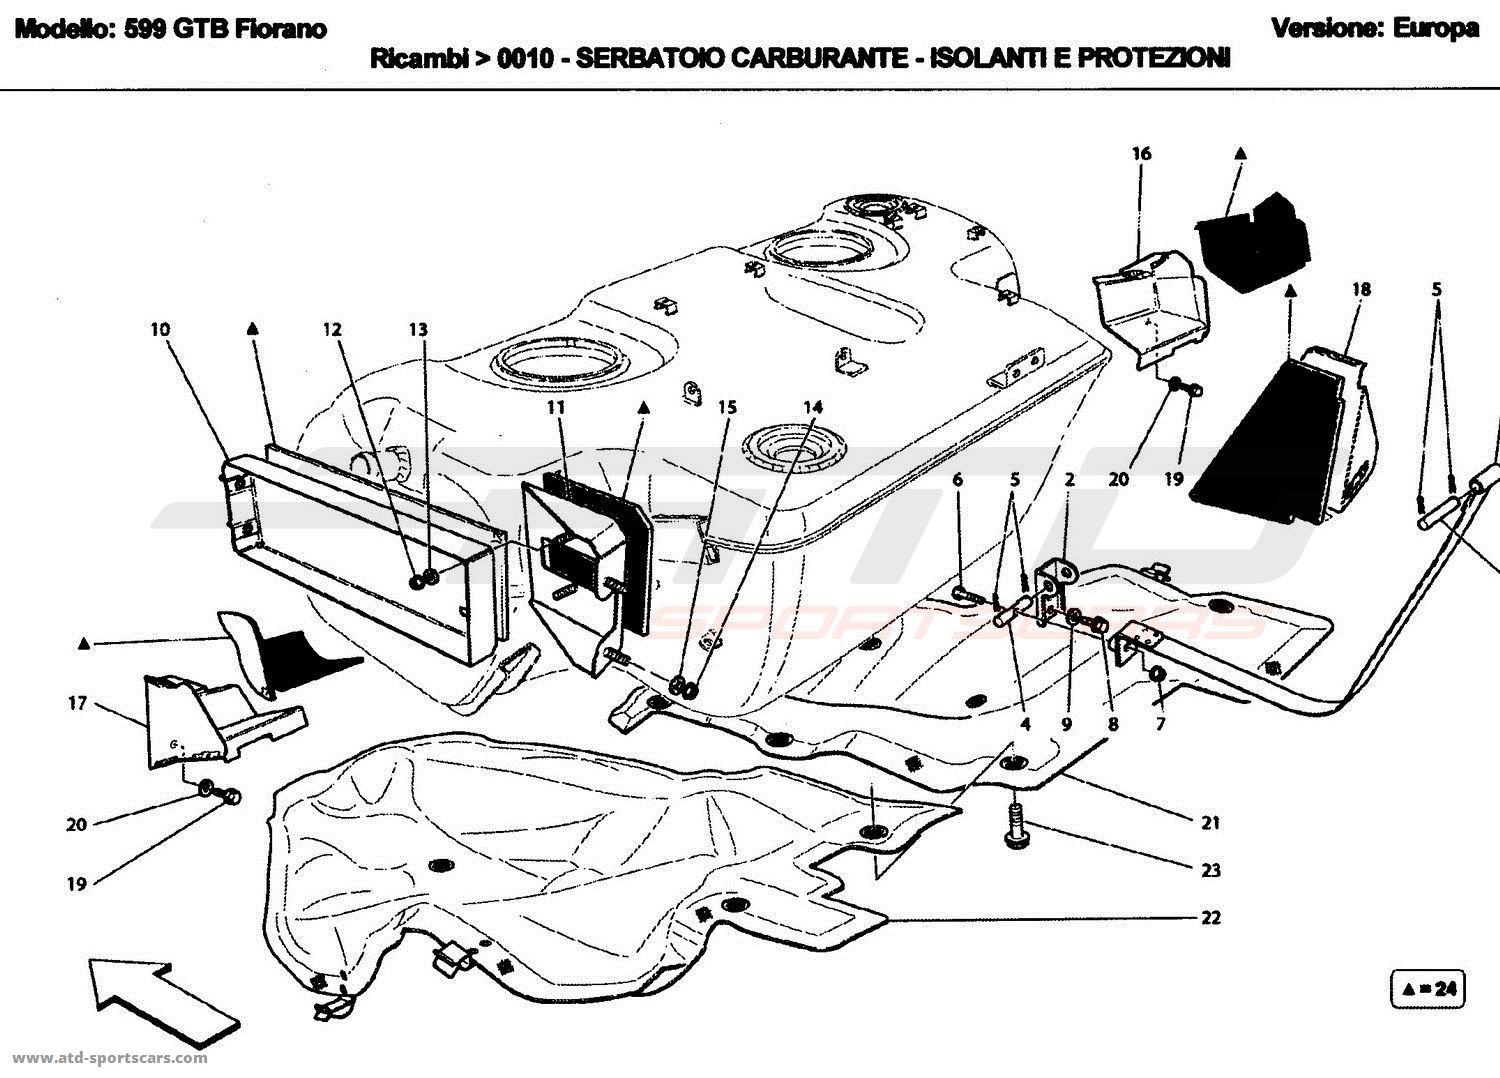 FUEL TANK -INSULATION AND PROTECTION